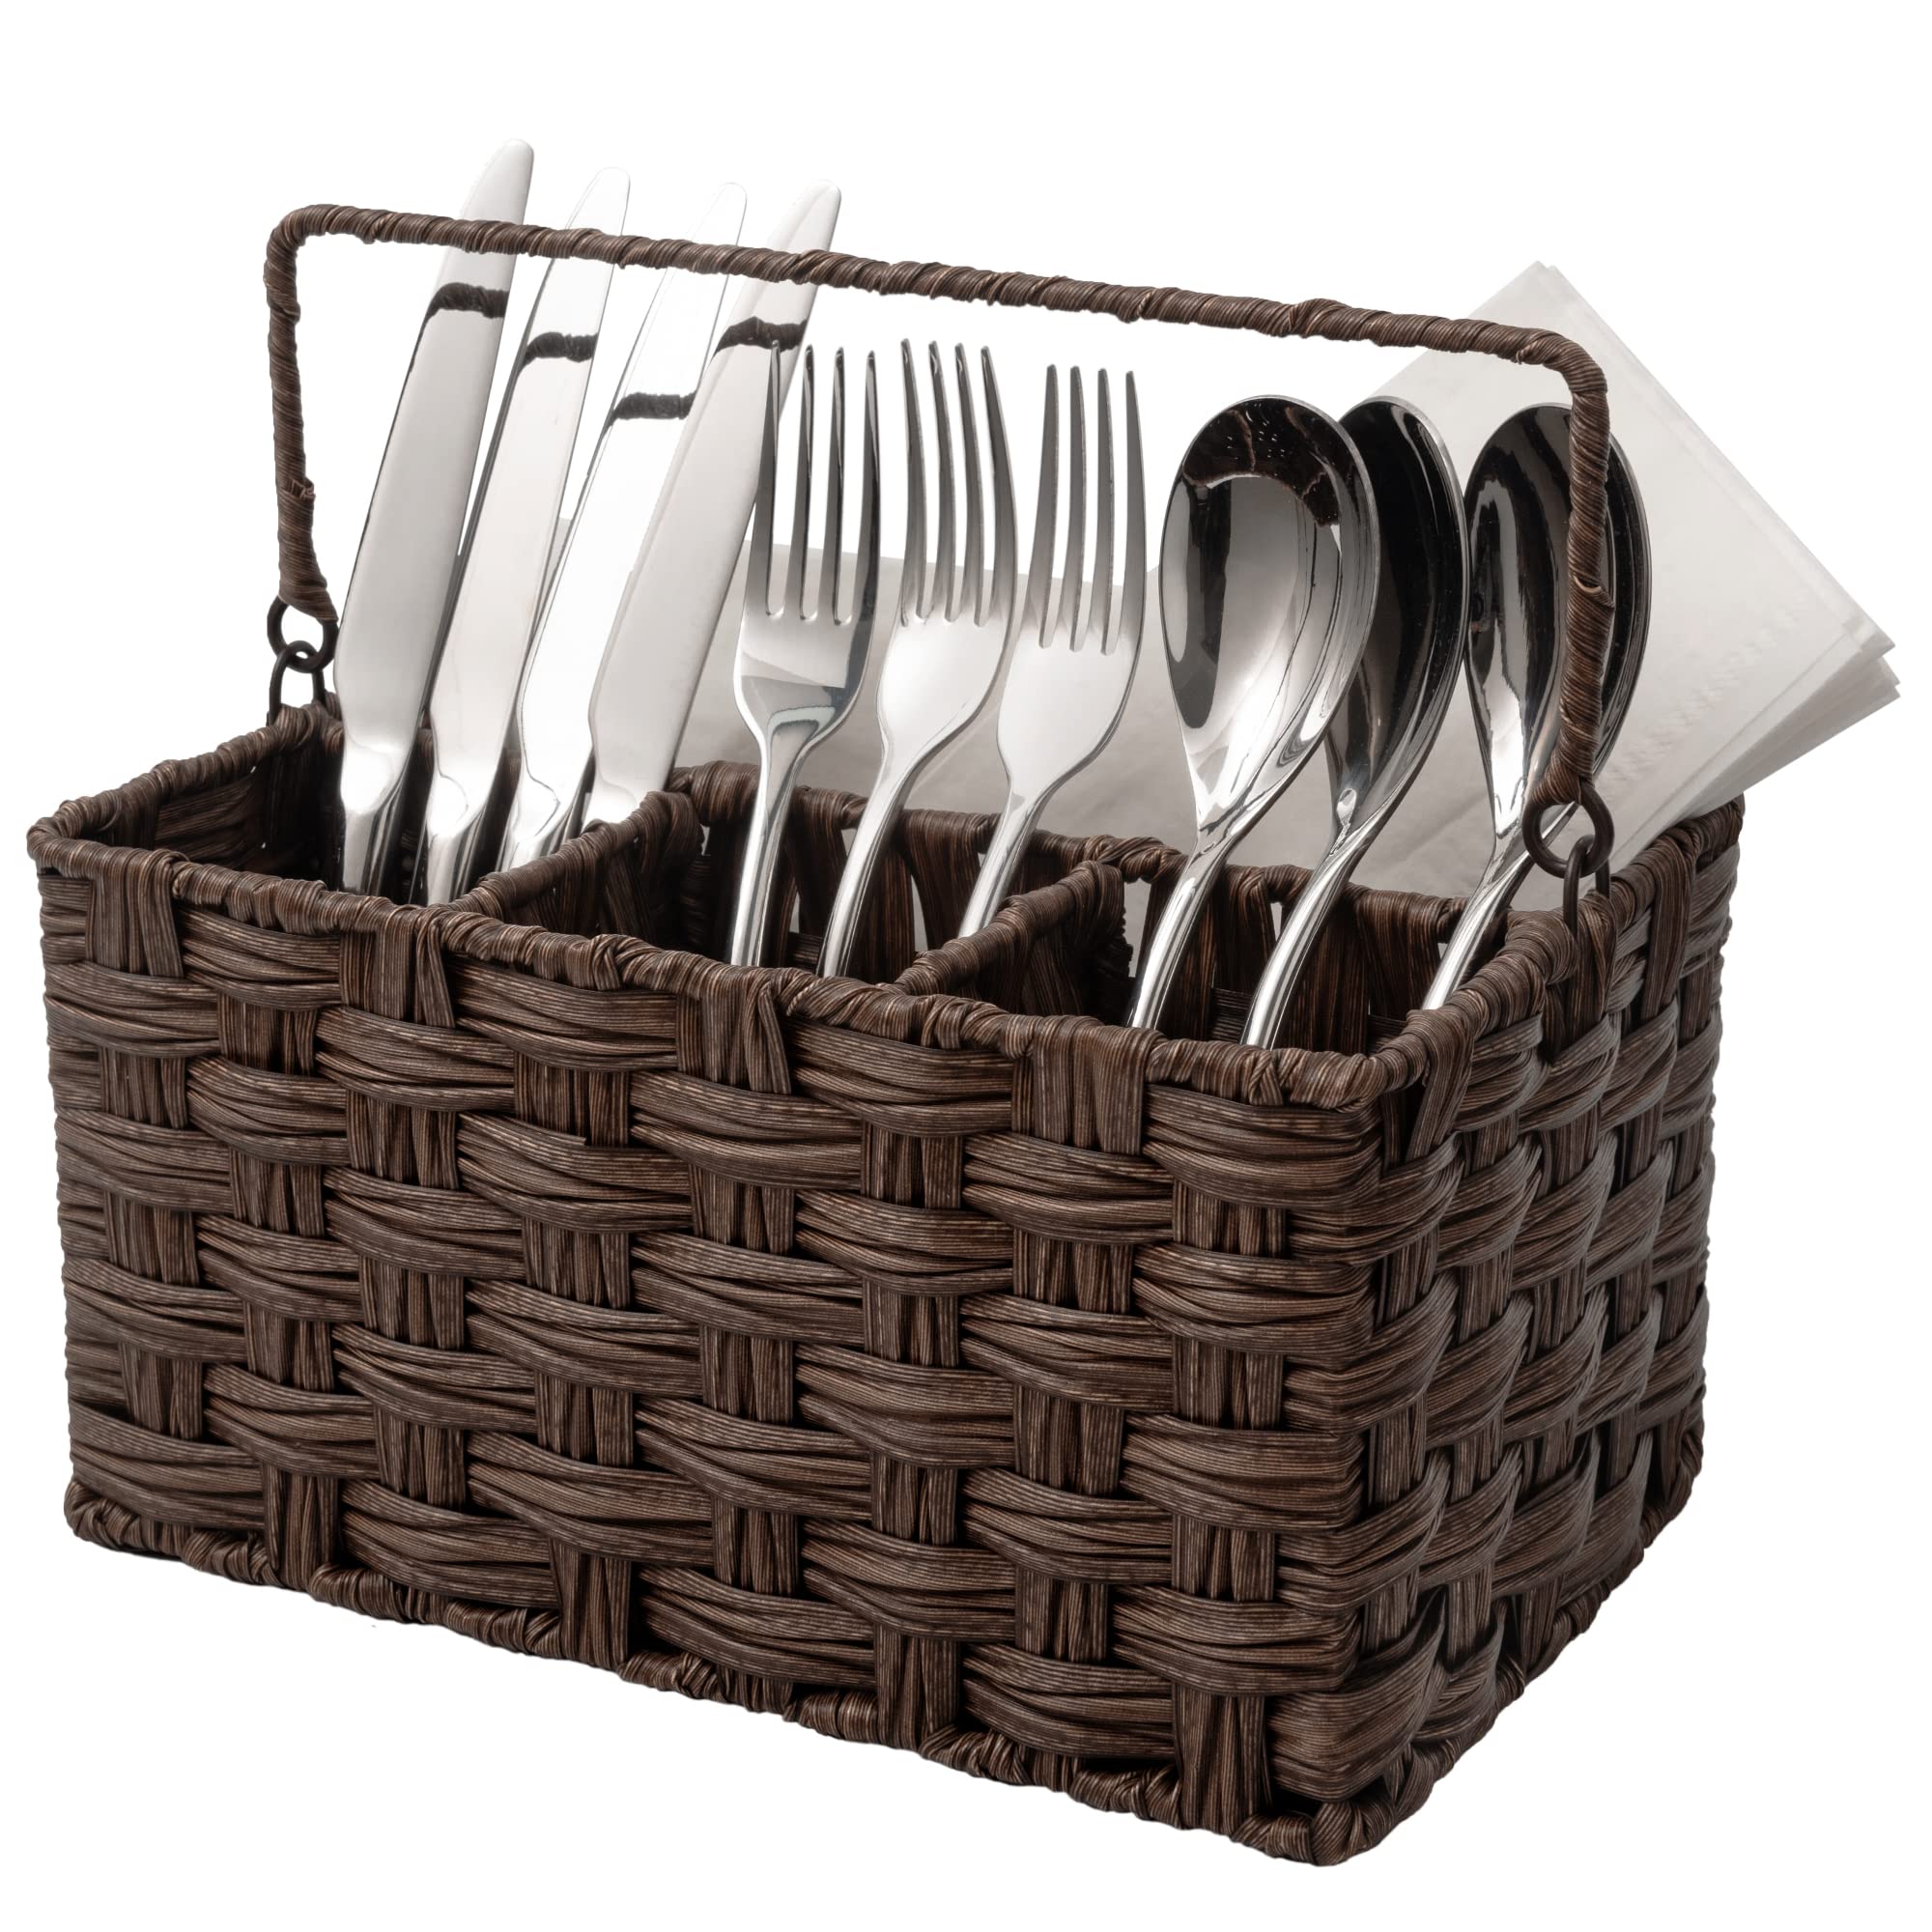 GRANNY SAYS Wicker Utensil Holder Organizer with Handle, Flatware Caddy for Kitchen, Silverware Holder Condiment Organizer, Holds Forks, Knives, Spoons, Napkins and Other Utensils